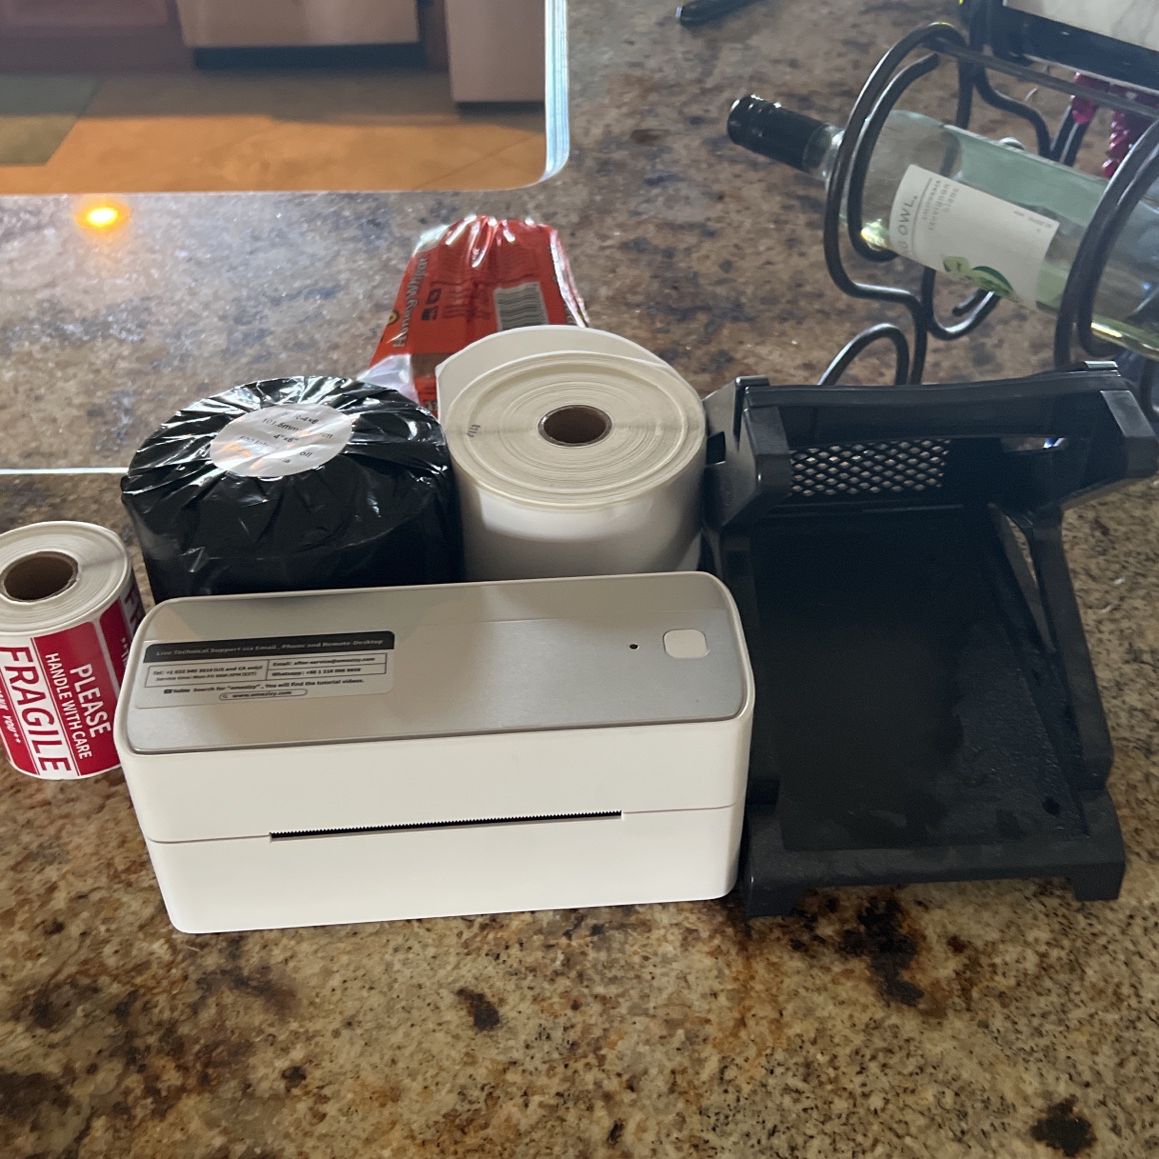 Label Printer With accessories